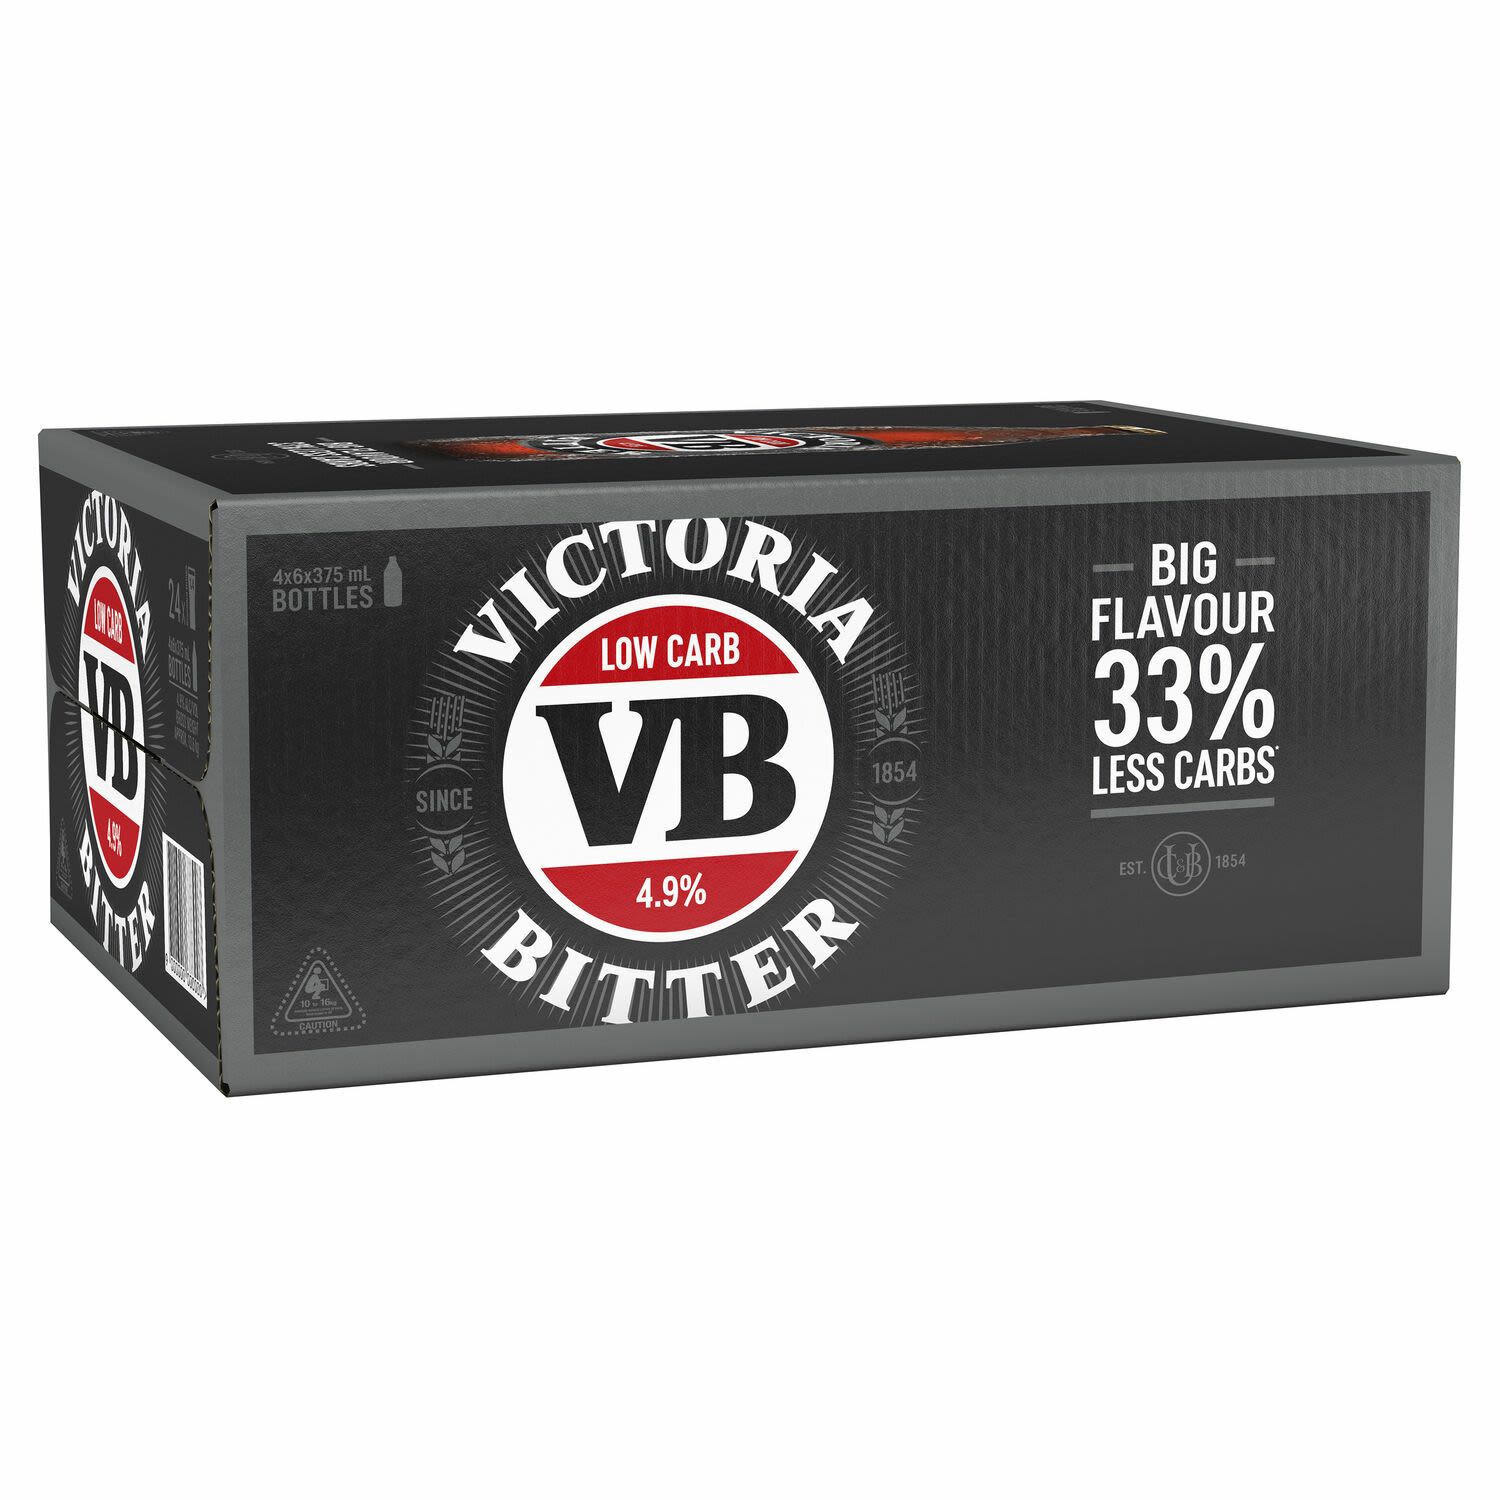 Victoria Bitter Low Carb Bottle 375mL 24 Pack